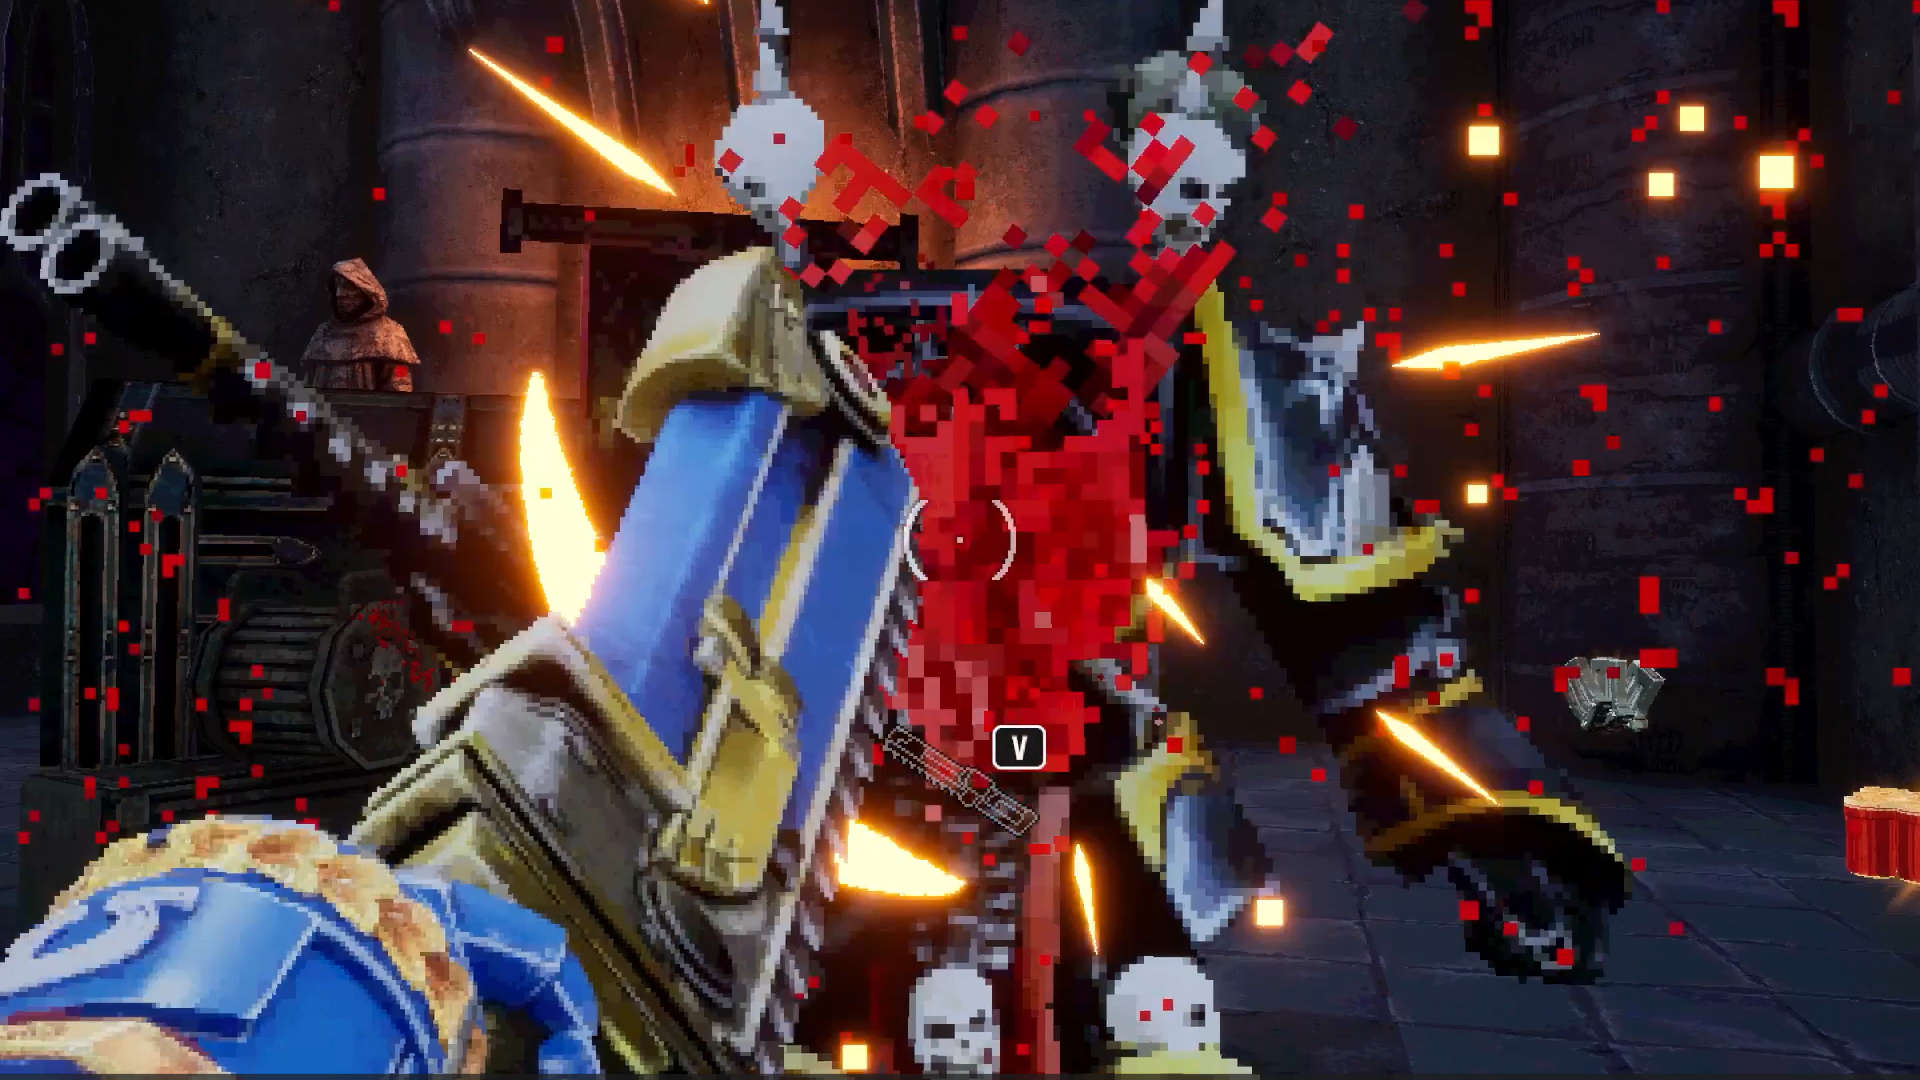 Warhammer 40k Boltgun is the 90s FPS you never knew you missed